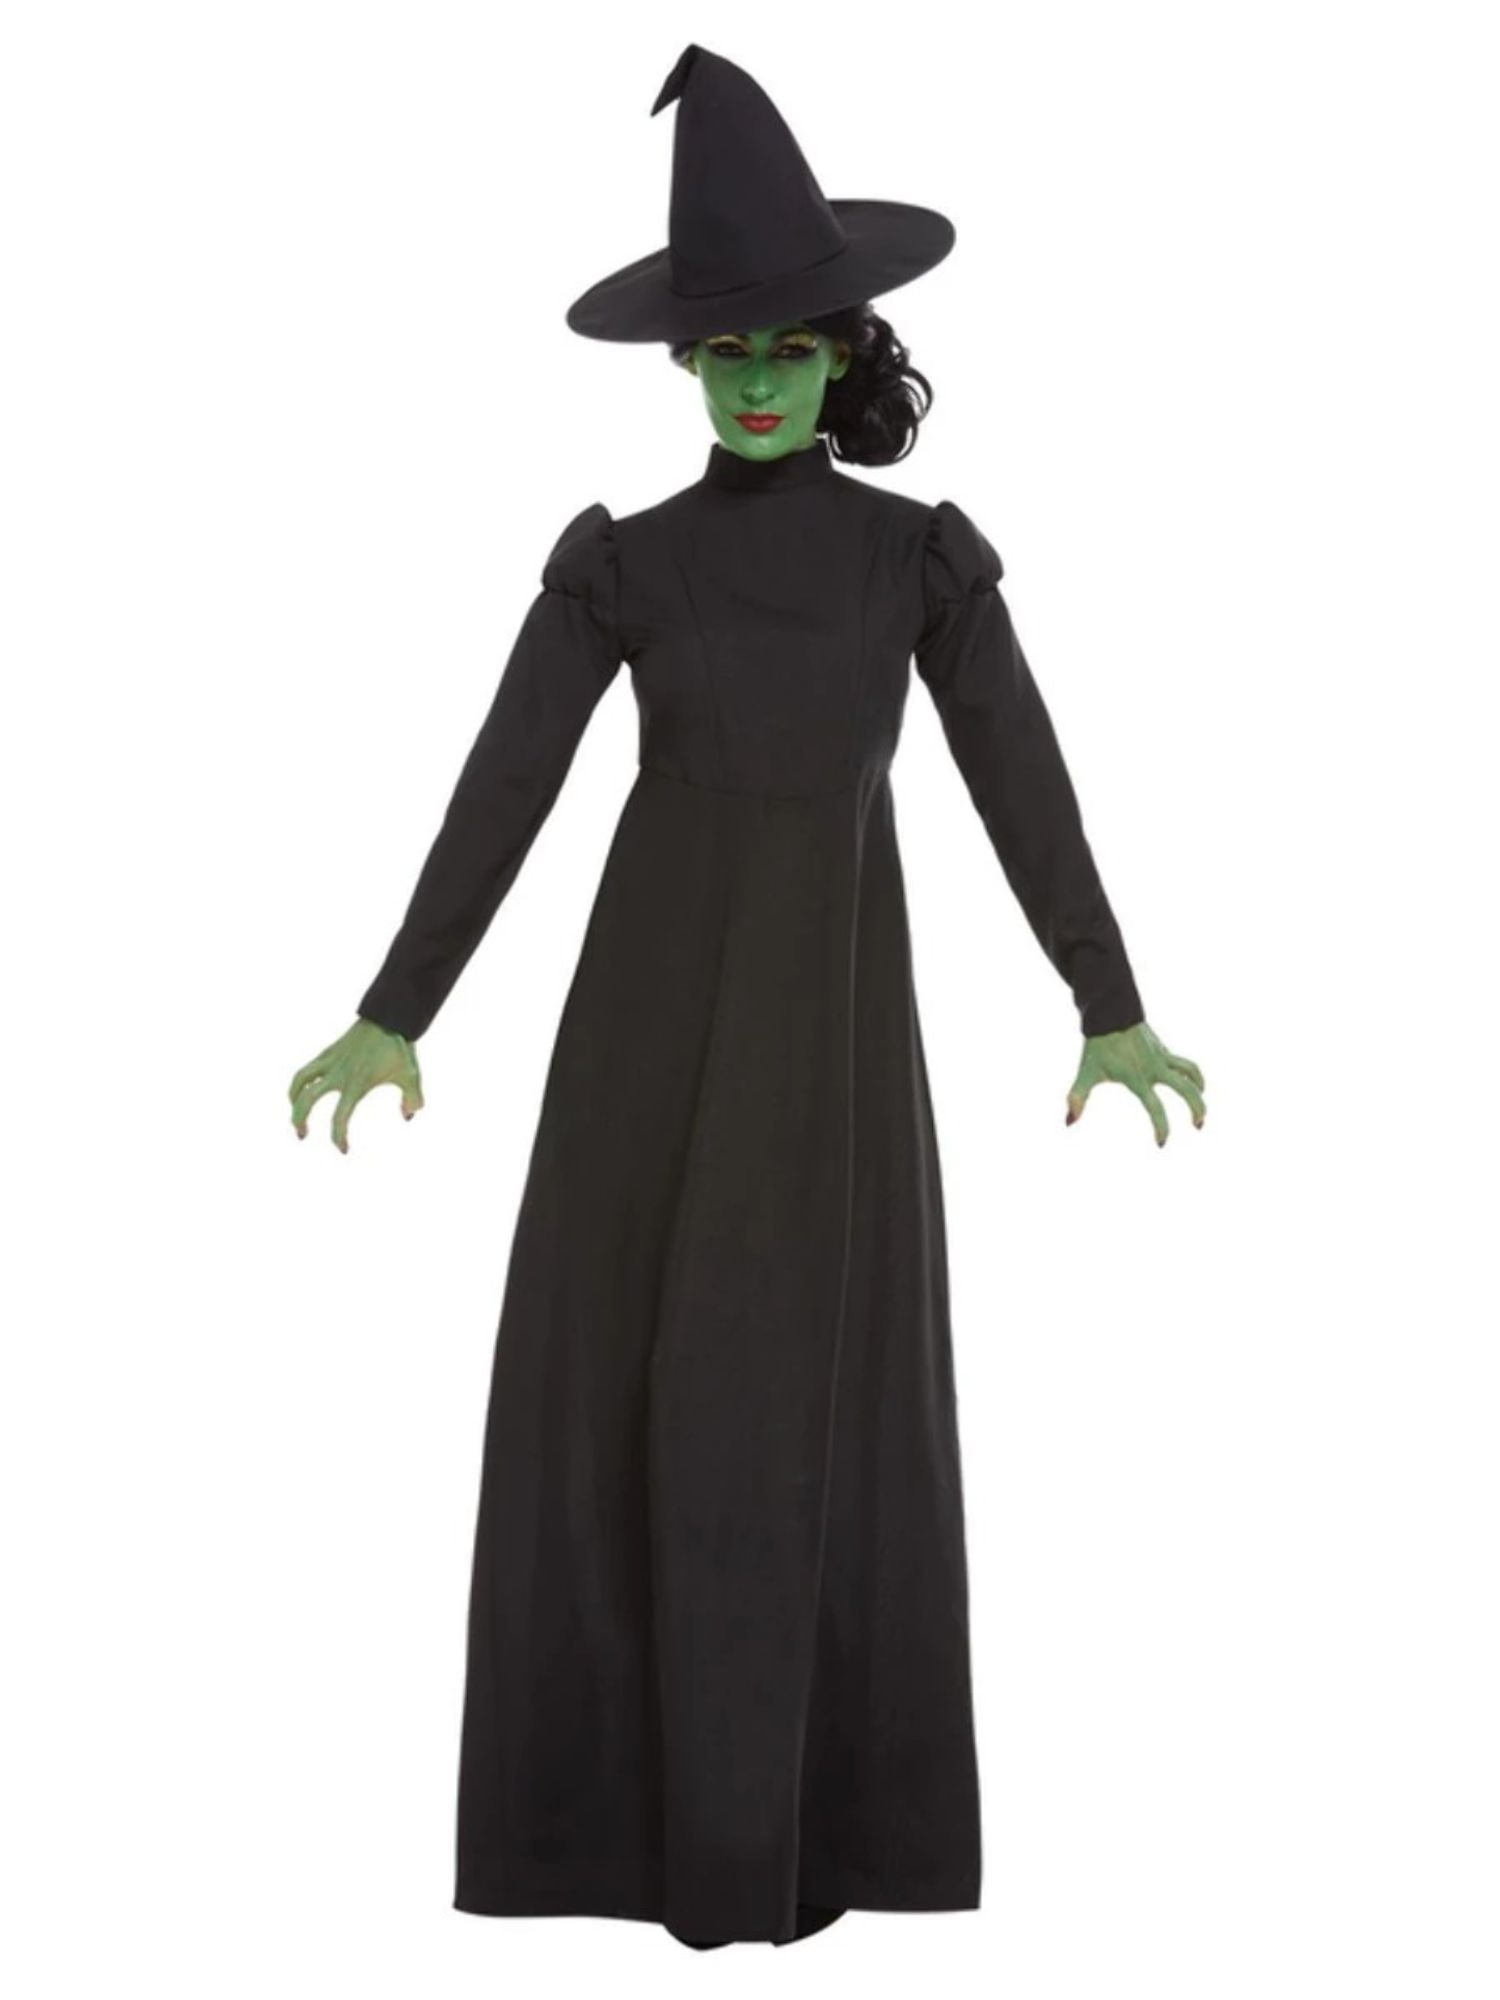 40 Black Wicked Witch Women Adult Halloween Costume Large